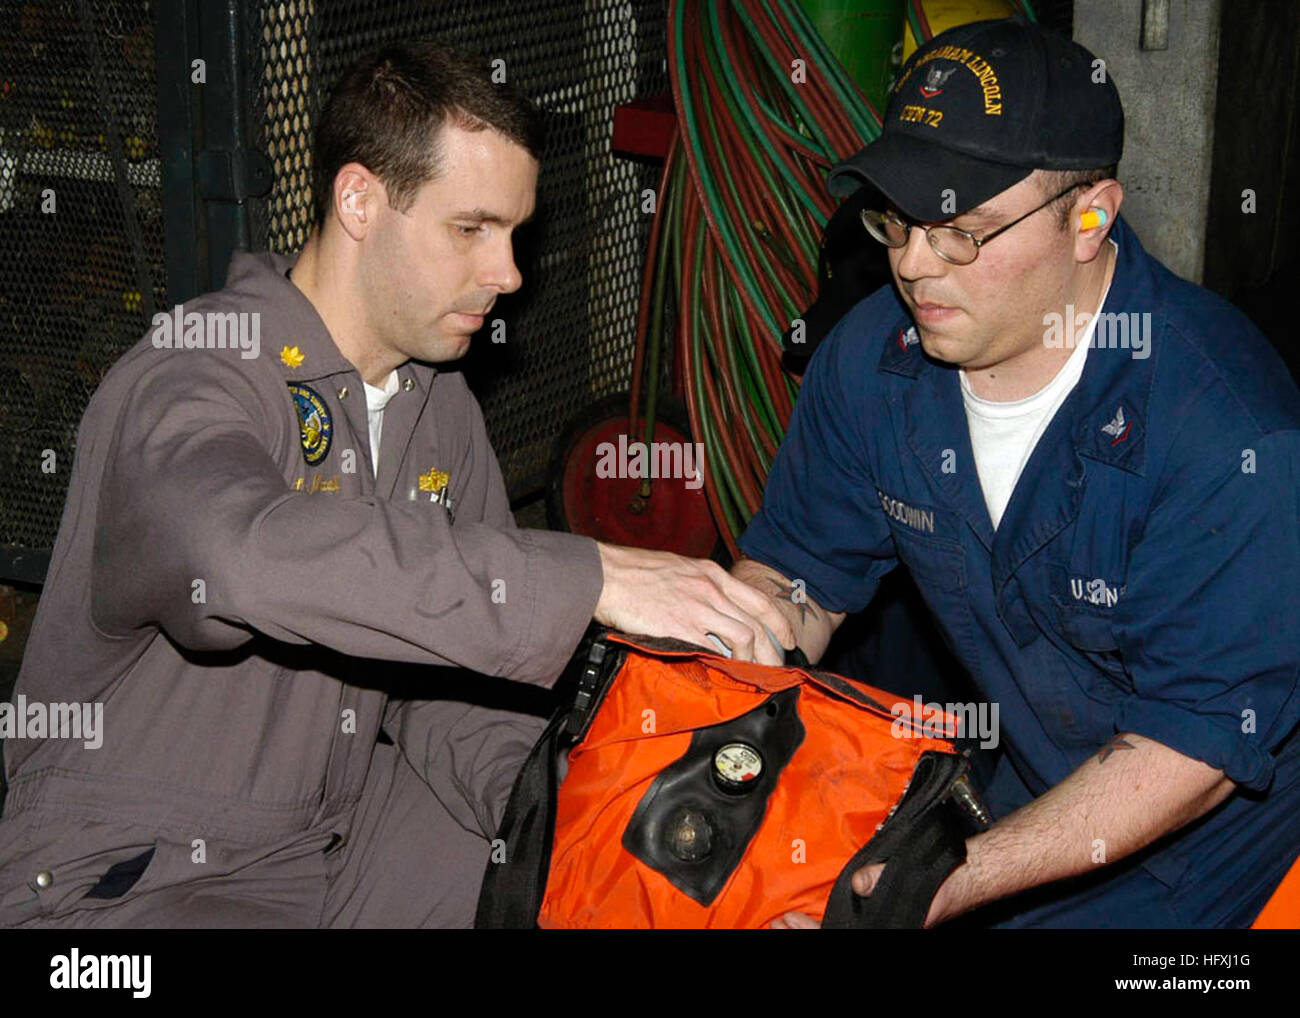 060110-N-9898L-013  Naval Air Station North Island (Jan. 10, 2006) - A member of an Inspection Survey (INSURV) team checks the condition of safety equipment in the hanger bay aboard the Nimitz- class aircraft carrier USS Abraham Lincoln (CVN 72). Lincoln is at North Island for the purpose of a Board of Inspection and Survey. U.S. Navy photo by Photographer's Mate Airman Geoffrey Lewis (RELEASED) US Navy 060110-N-9898L-013 A member of an Inspection Survey (INSURV) team checks the condition of safety equipment in the hanger bay Stock Photo